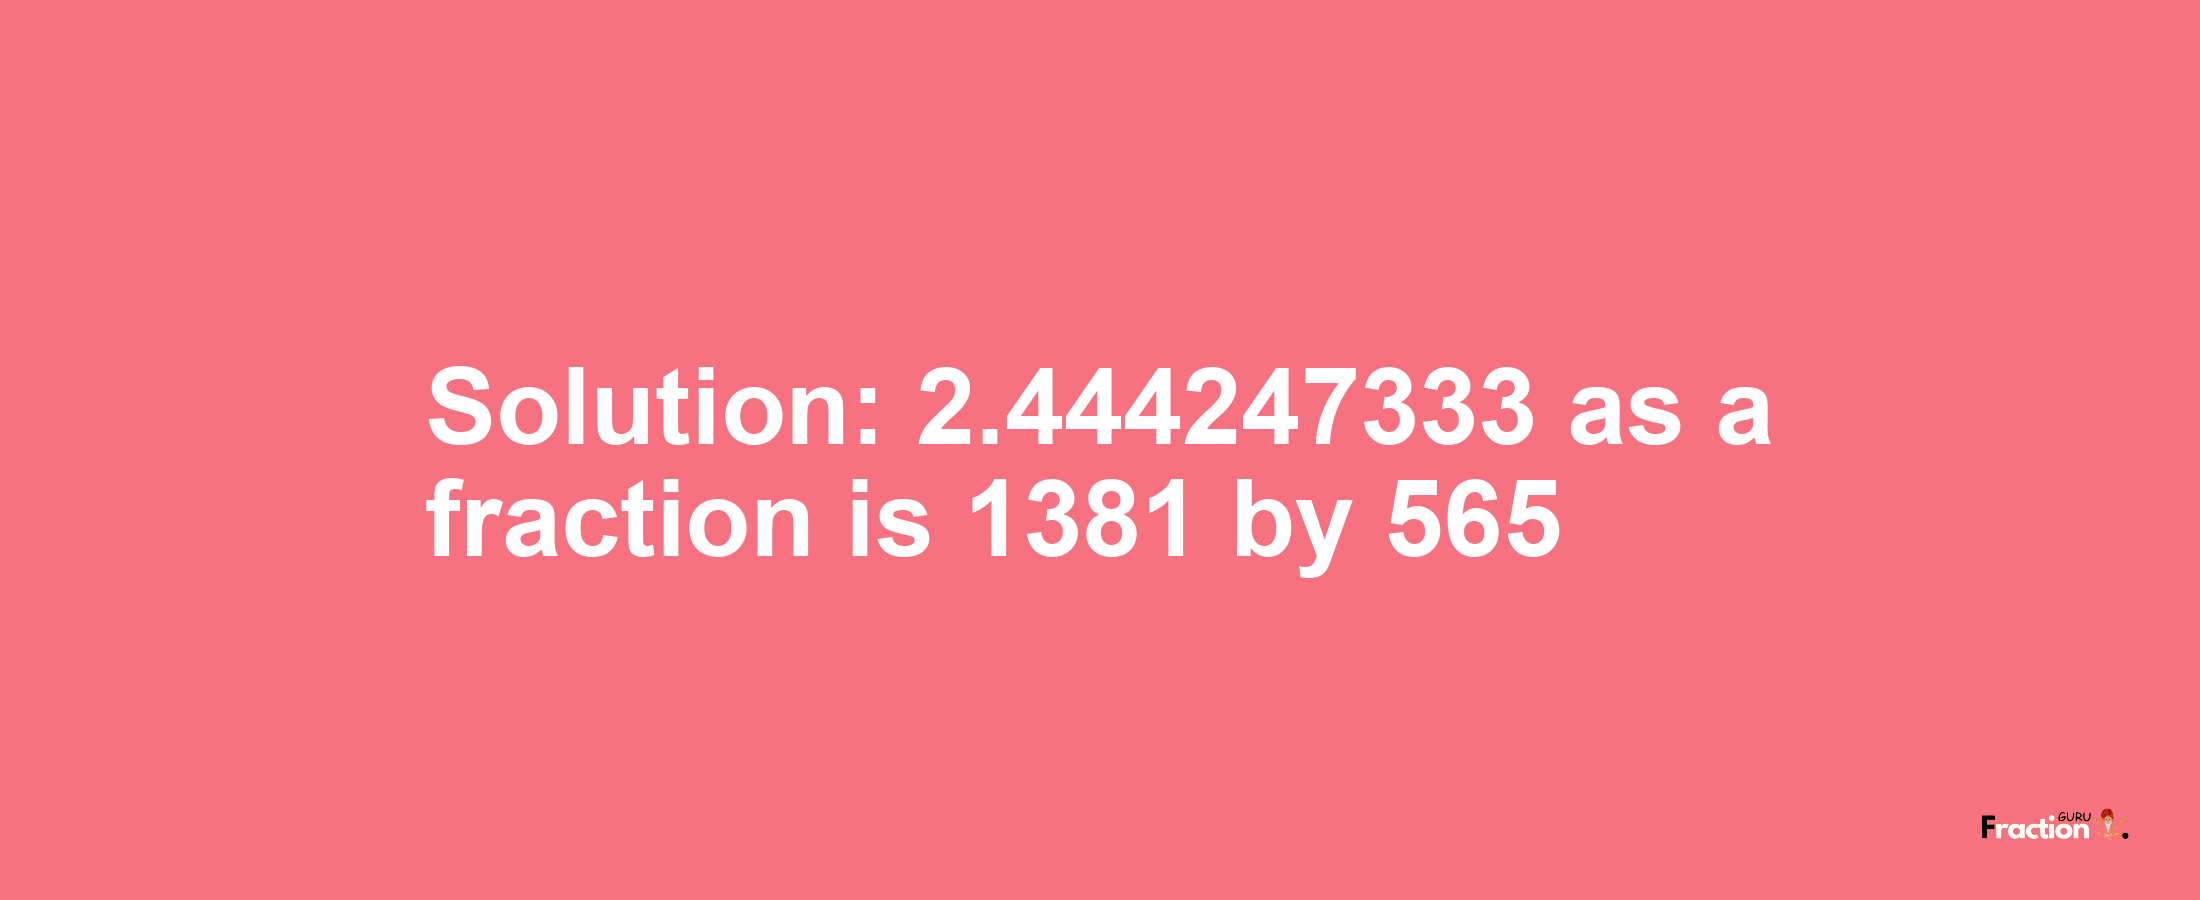 Solution:2.444247333 as a fraction is 1381/565